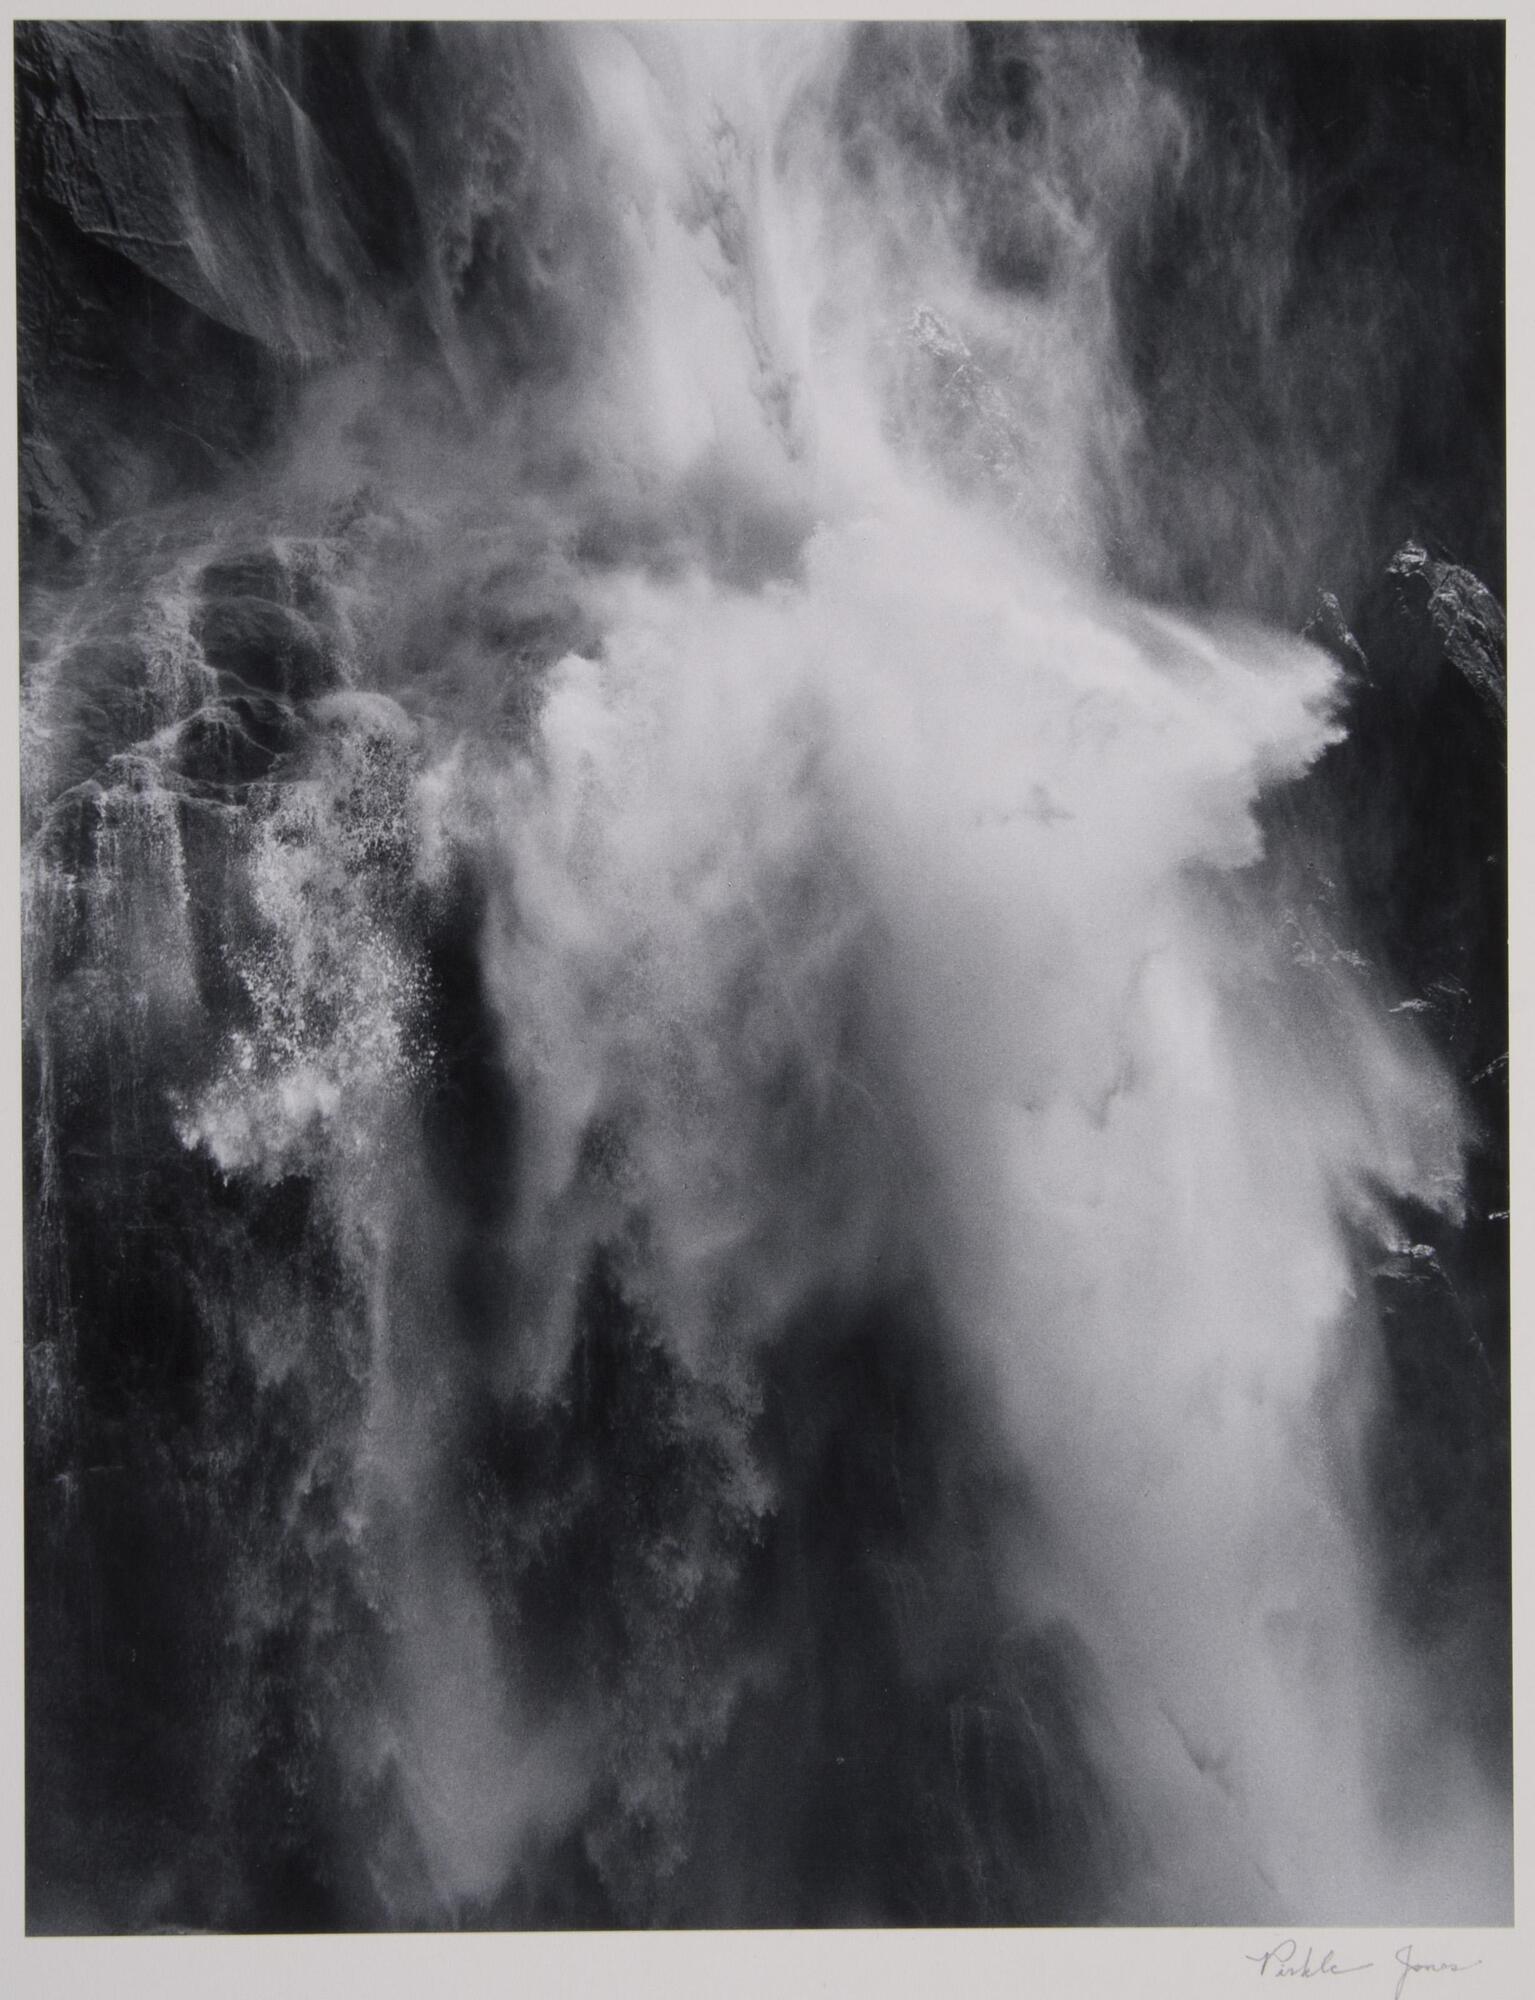 This vertical image is of a waterfall flowing down the side of a hill. It is the middle of the waterfall and the upper and lower portions are not visible. The water on the right hand side appears to be stronger than the left, creating a larger splash.